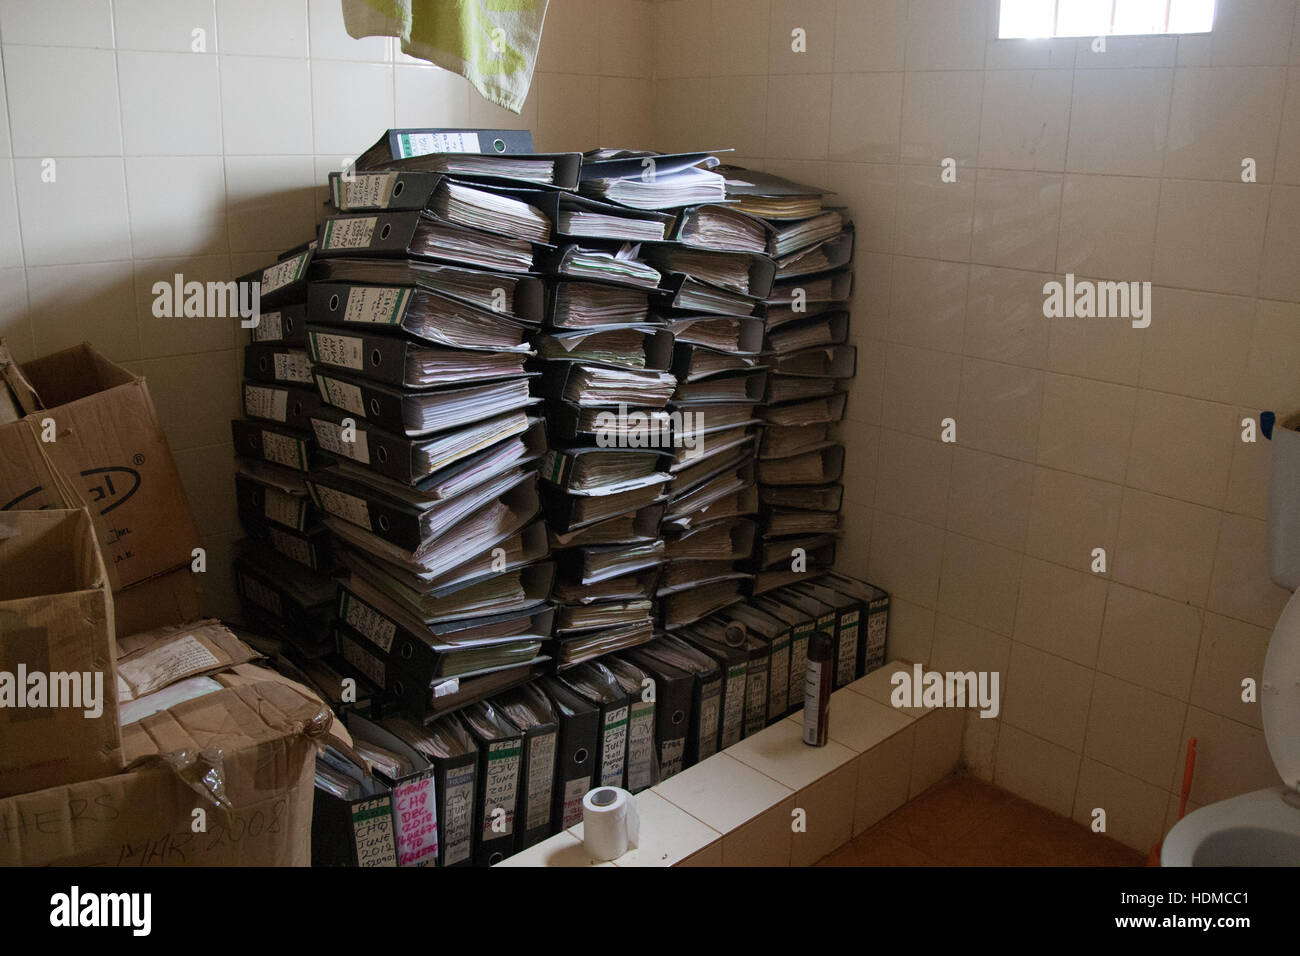 Pile of ring binders in shower base Stock Photo